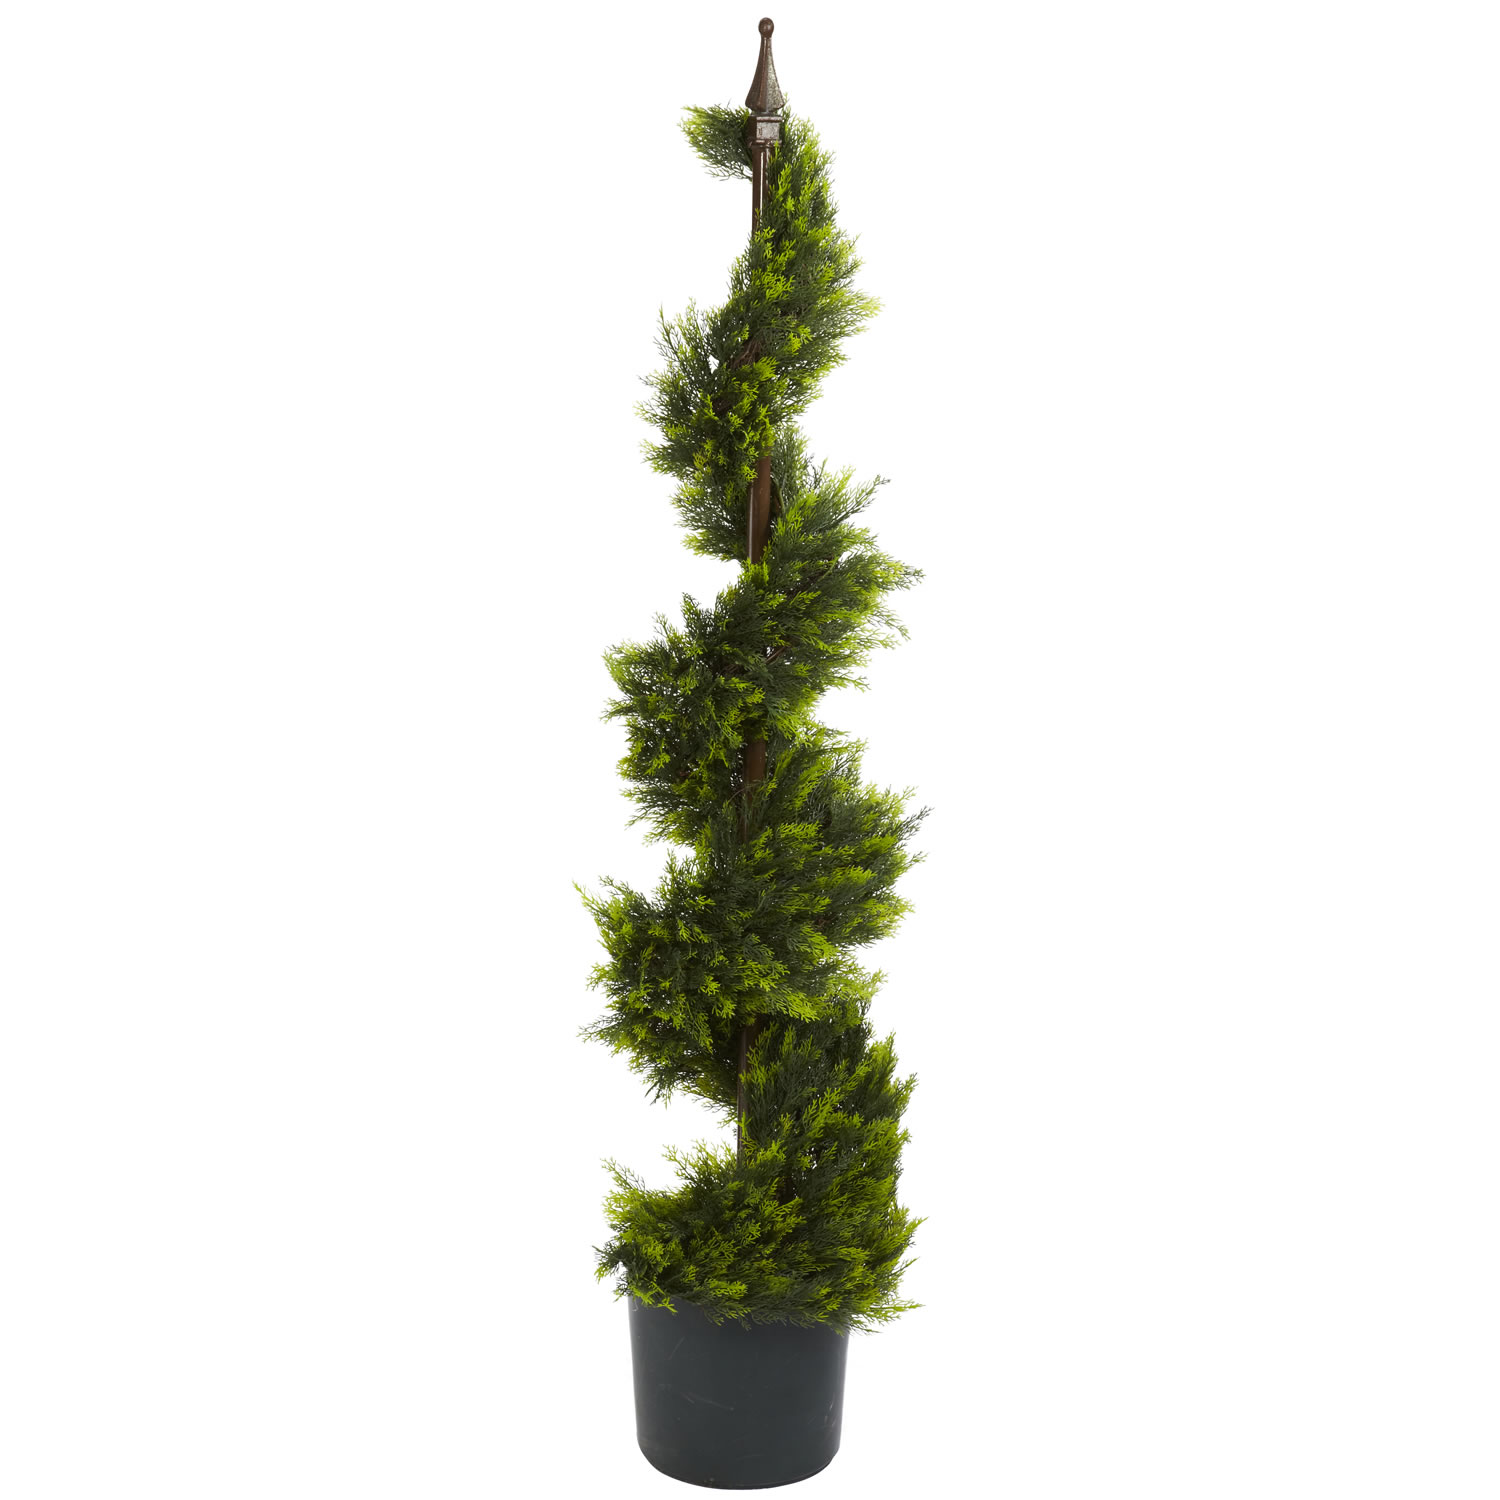 4 Foot Cypress Spiral Topiary With Finial: Potted